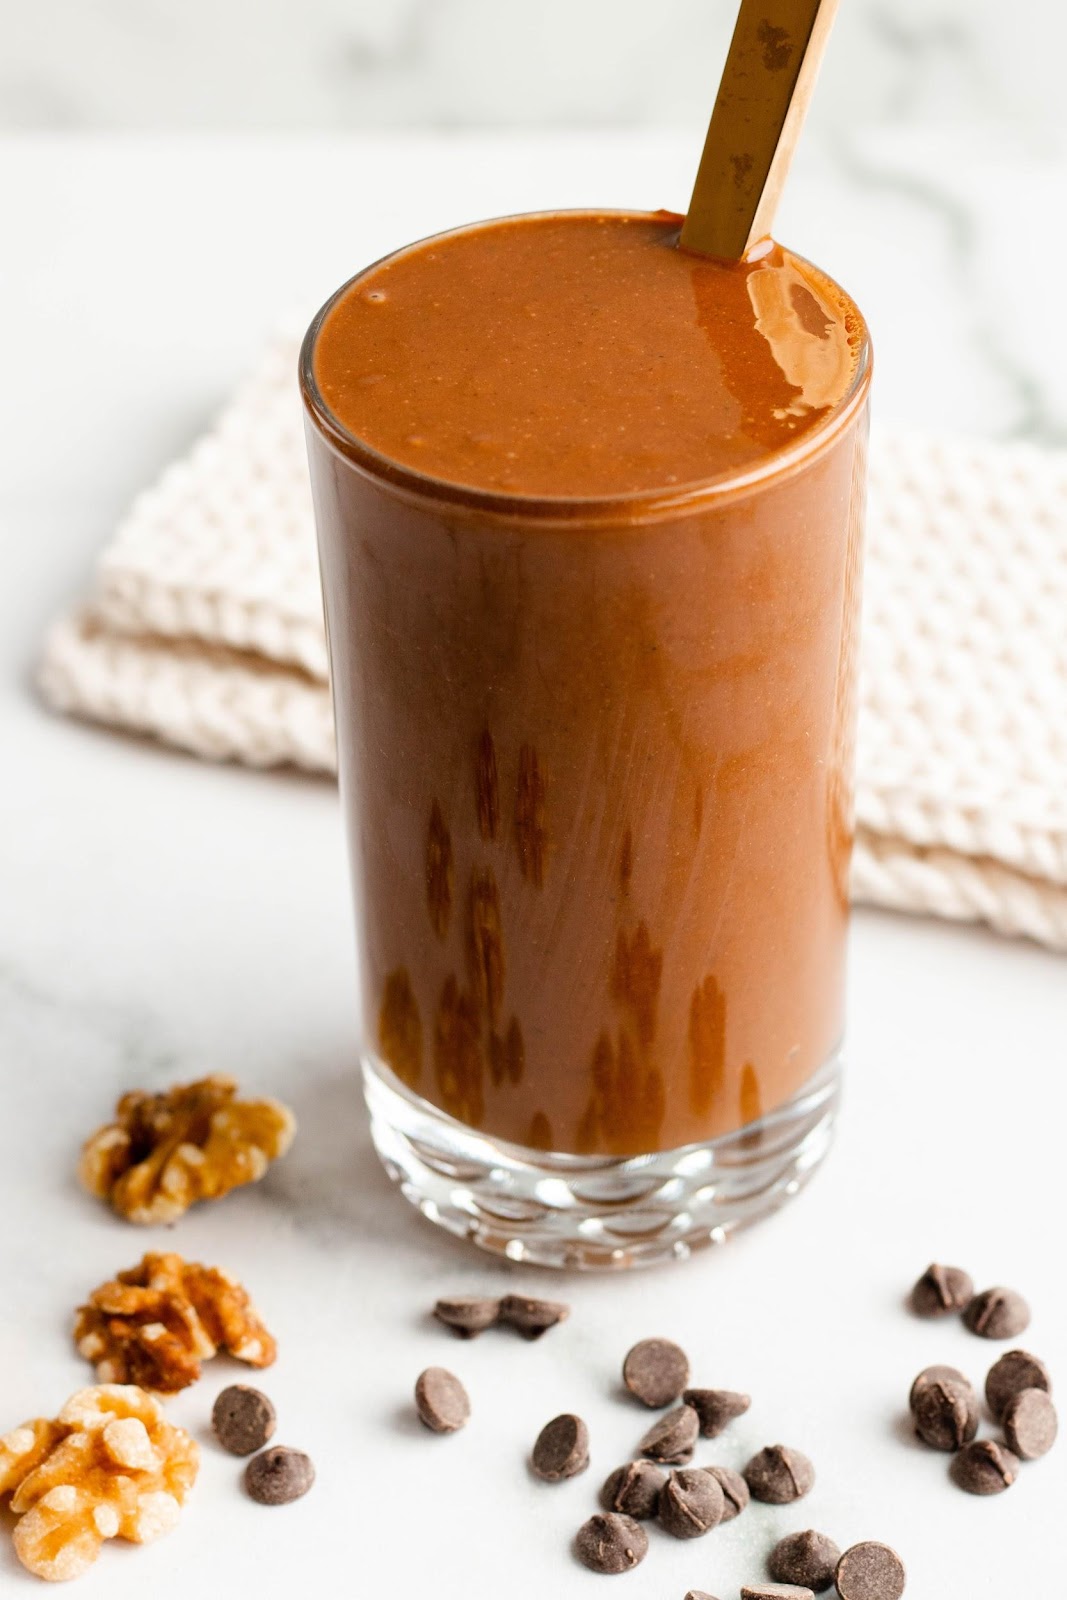 How to Make Chocolate Walnut Butter | Daisybeet, MS, RD